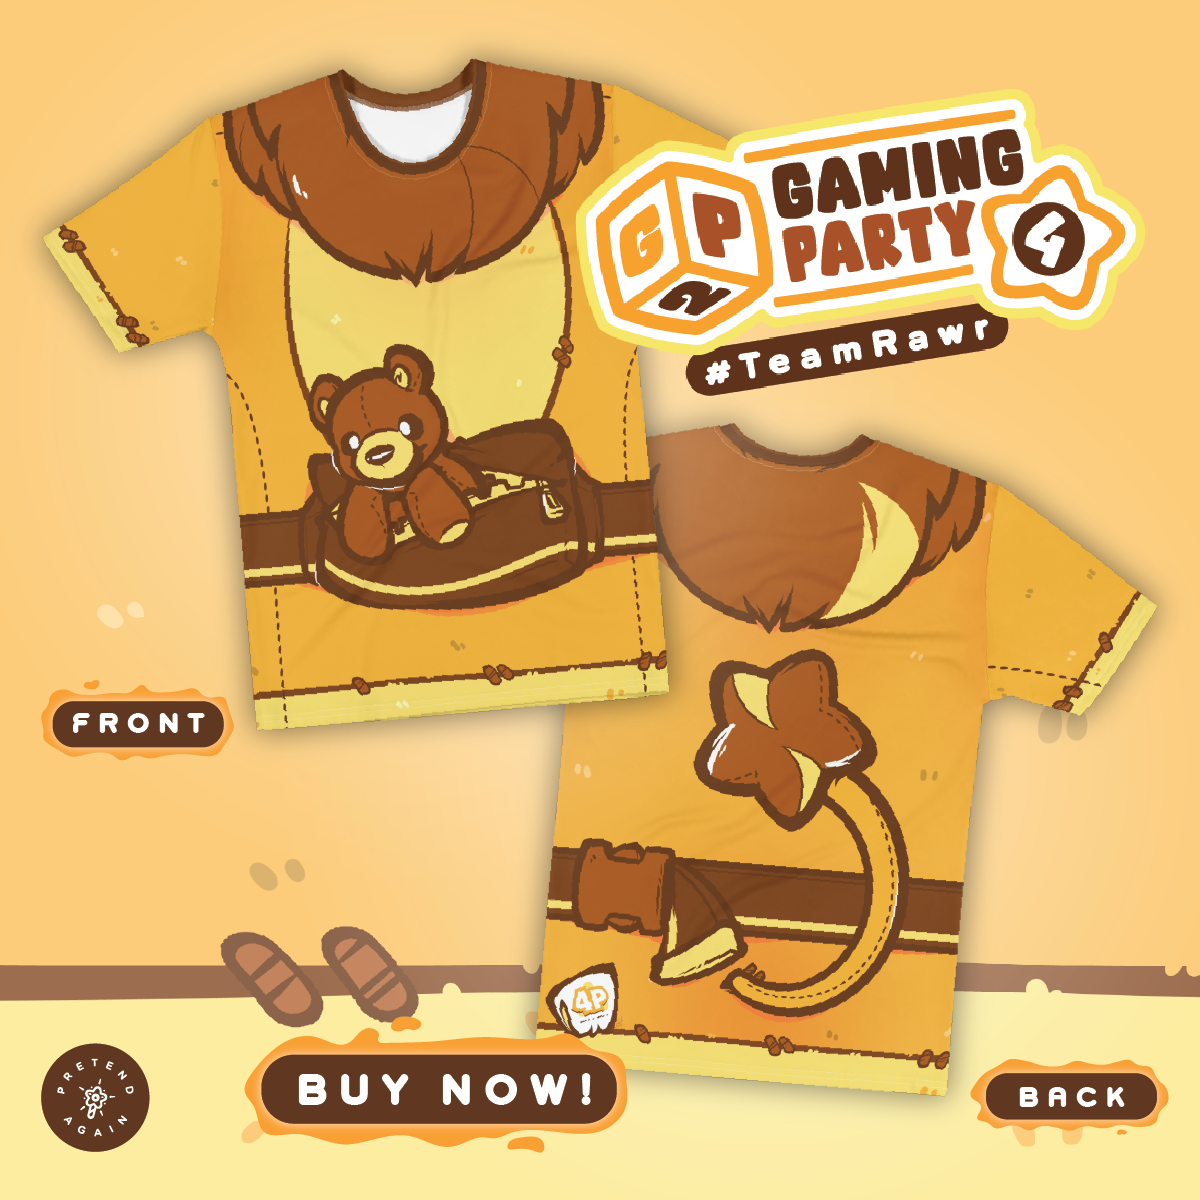 Gaming Party 2 - All-Over-Rawr T-shirt - #TeamRawr